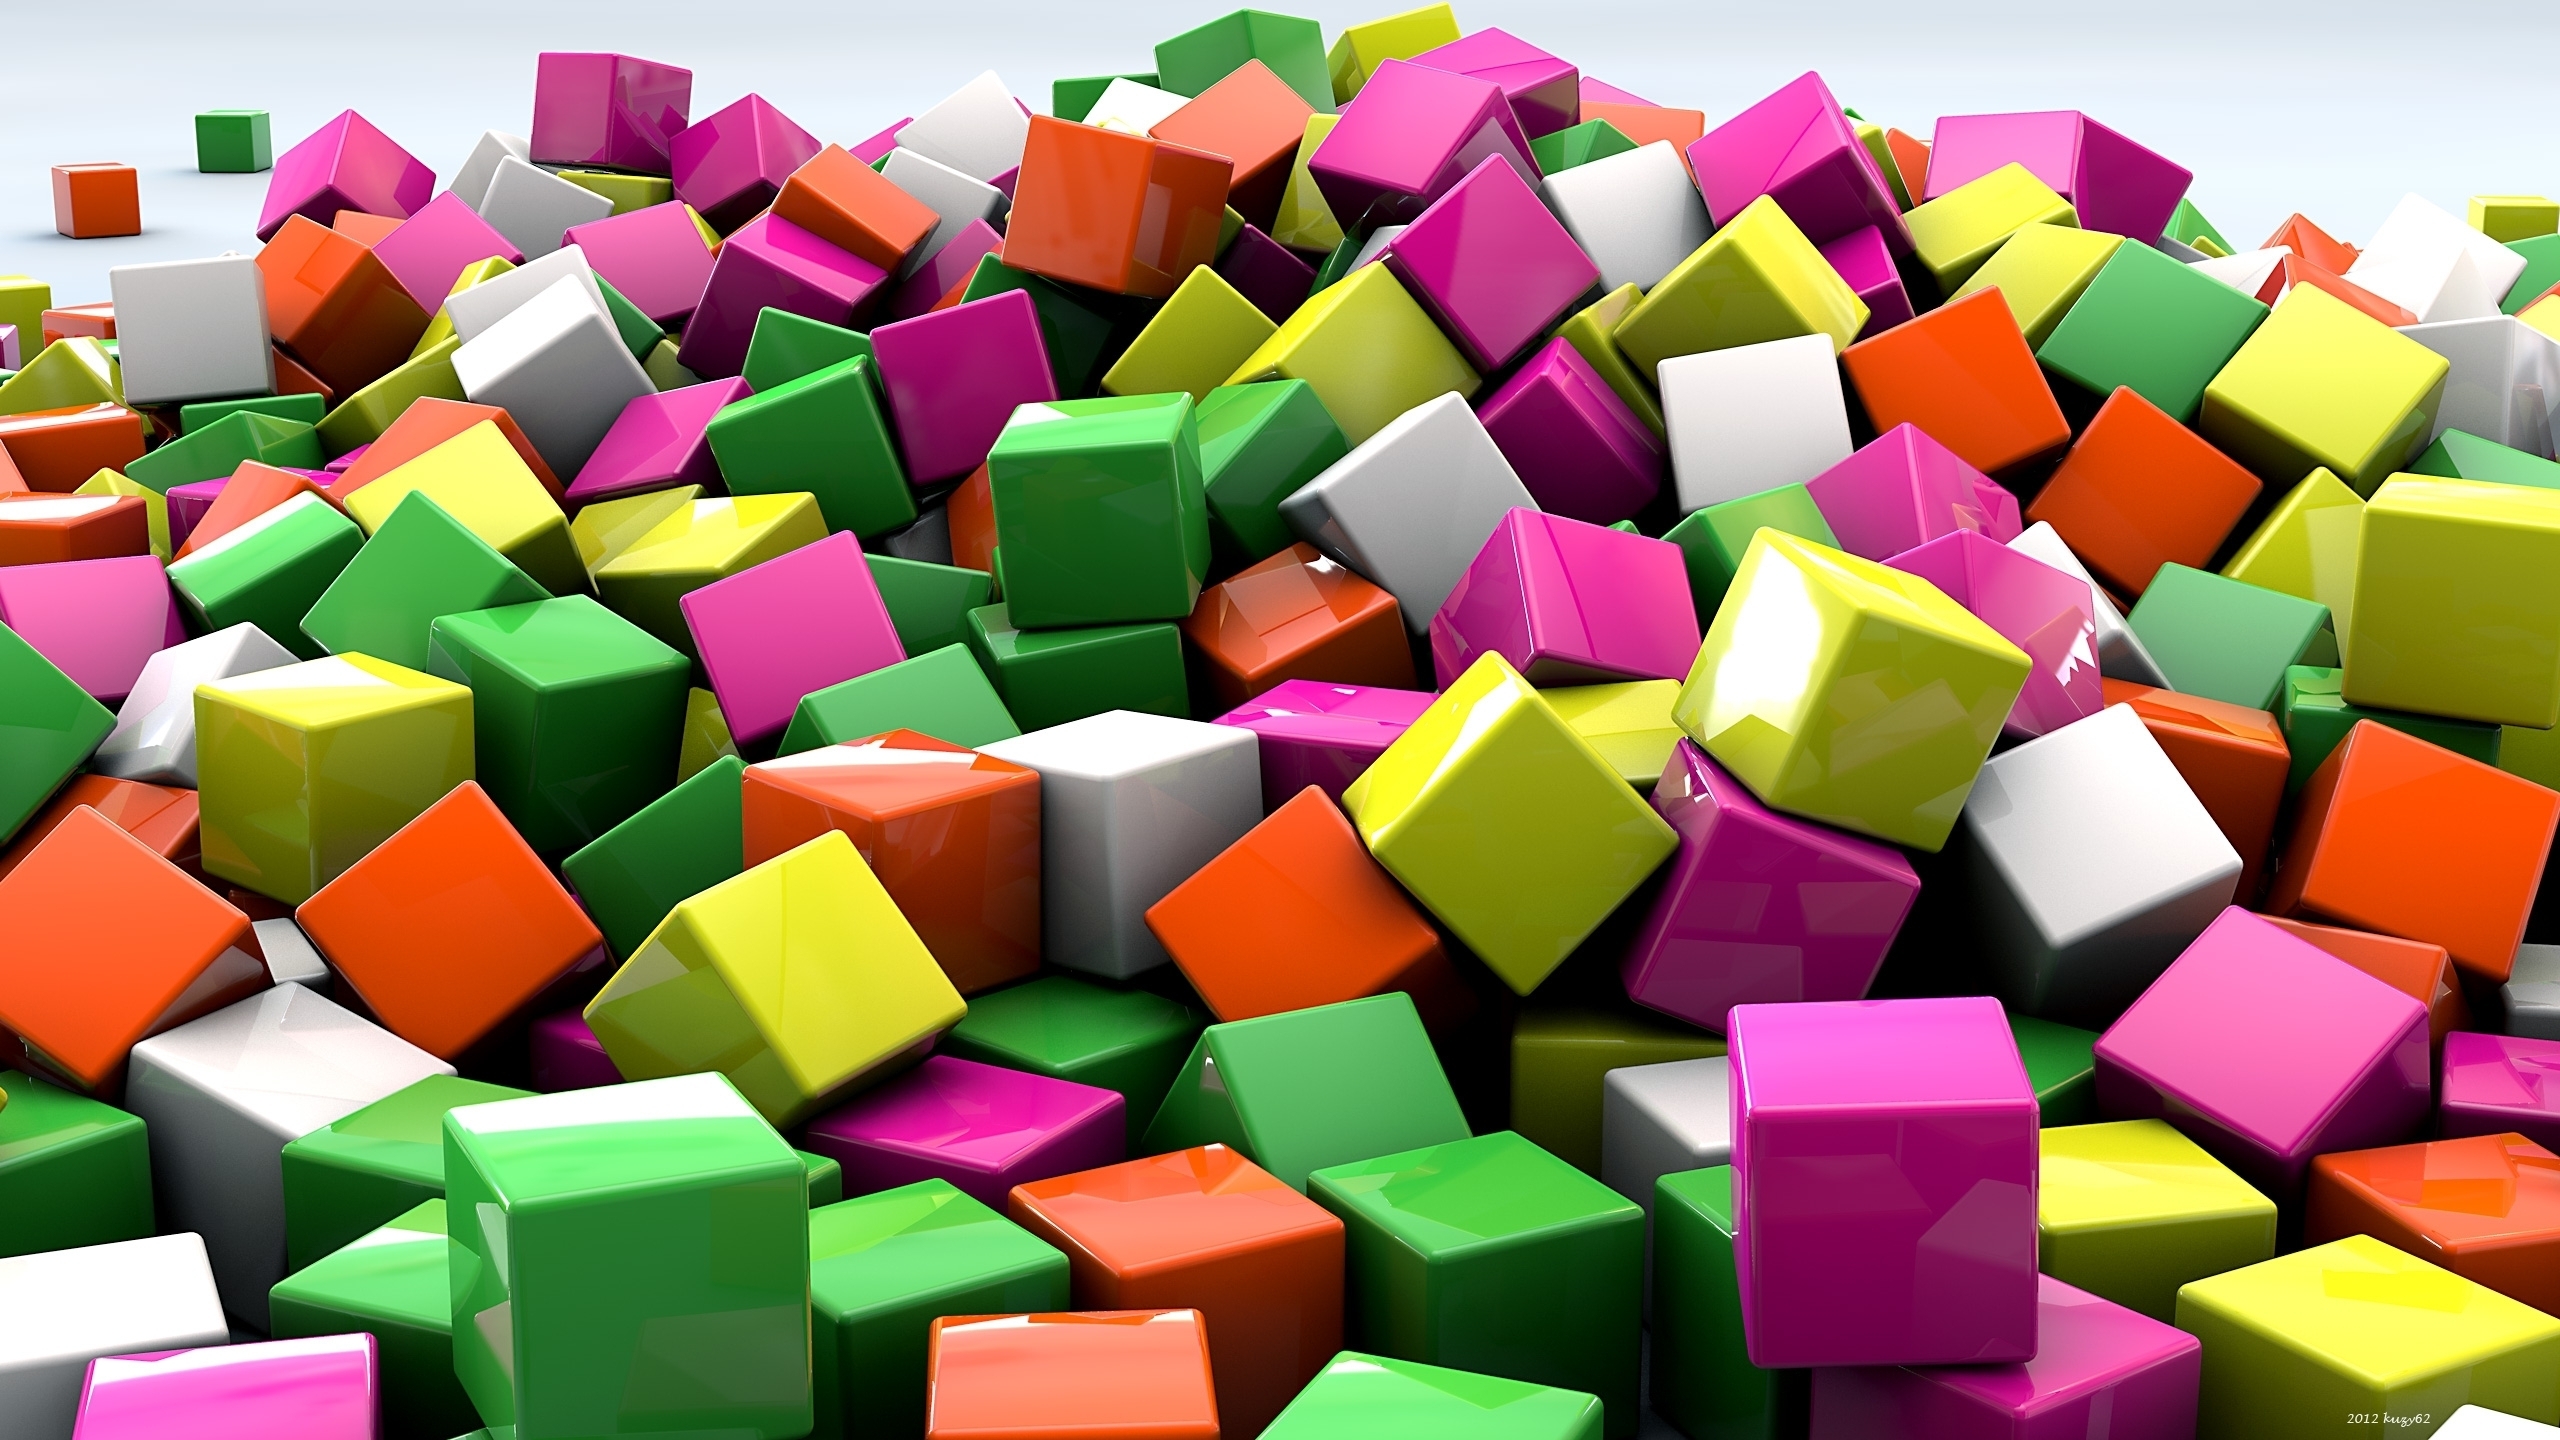 3D Coloured Cubed for 2560x1440 HDTV resolution